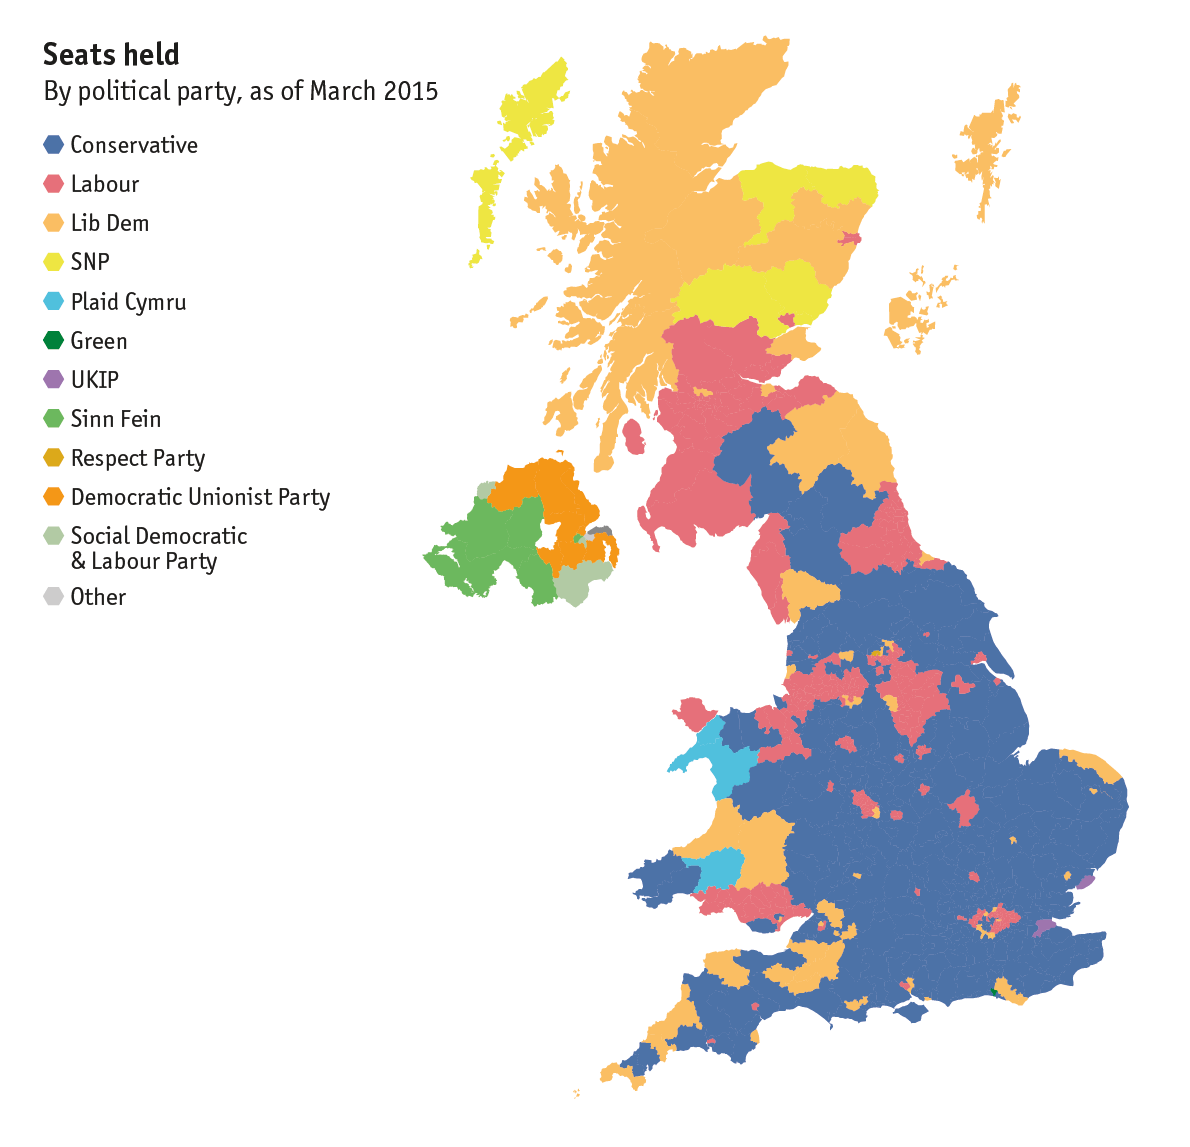 2015 Uk Election Map Seats held By political party, as of March 2015